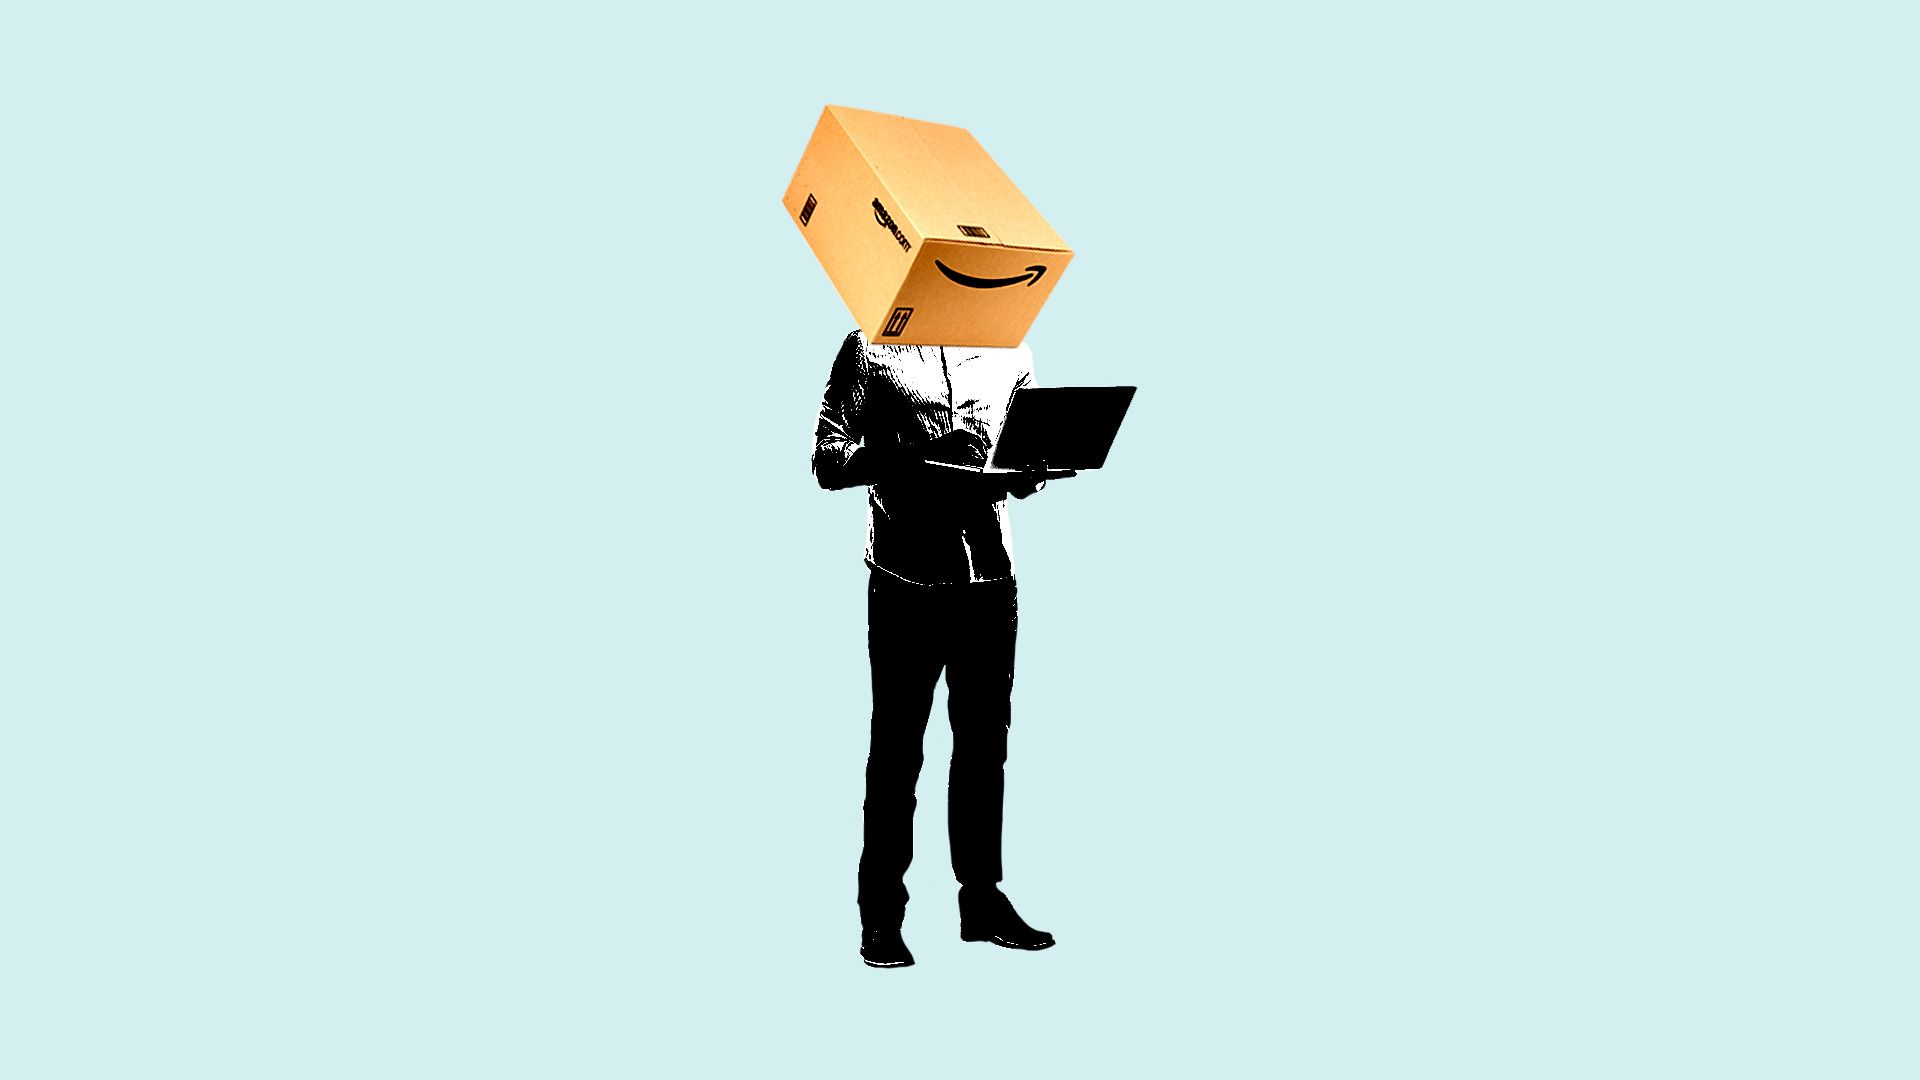 An illustration of a man with an Amazon box for a head working on a laptop.